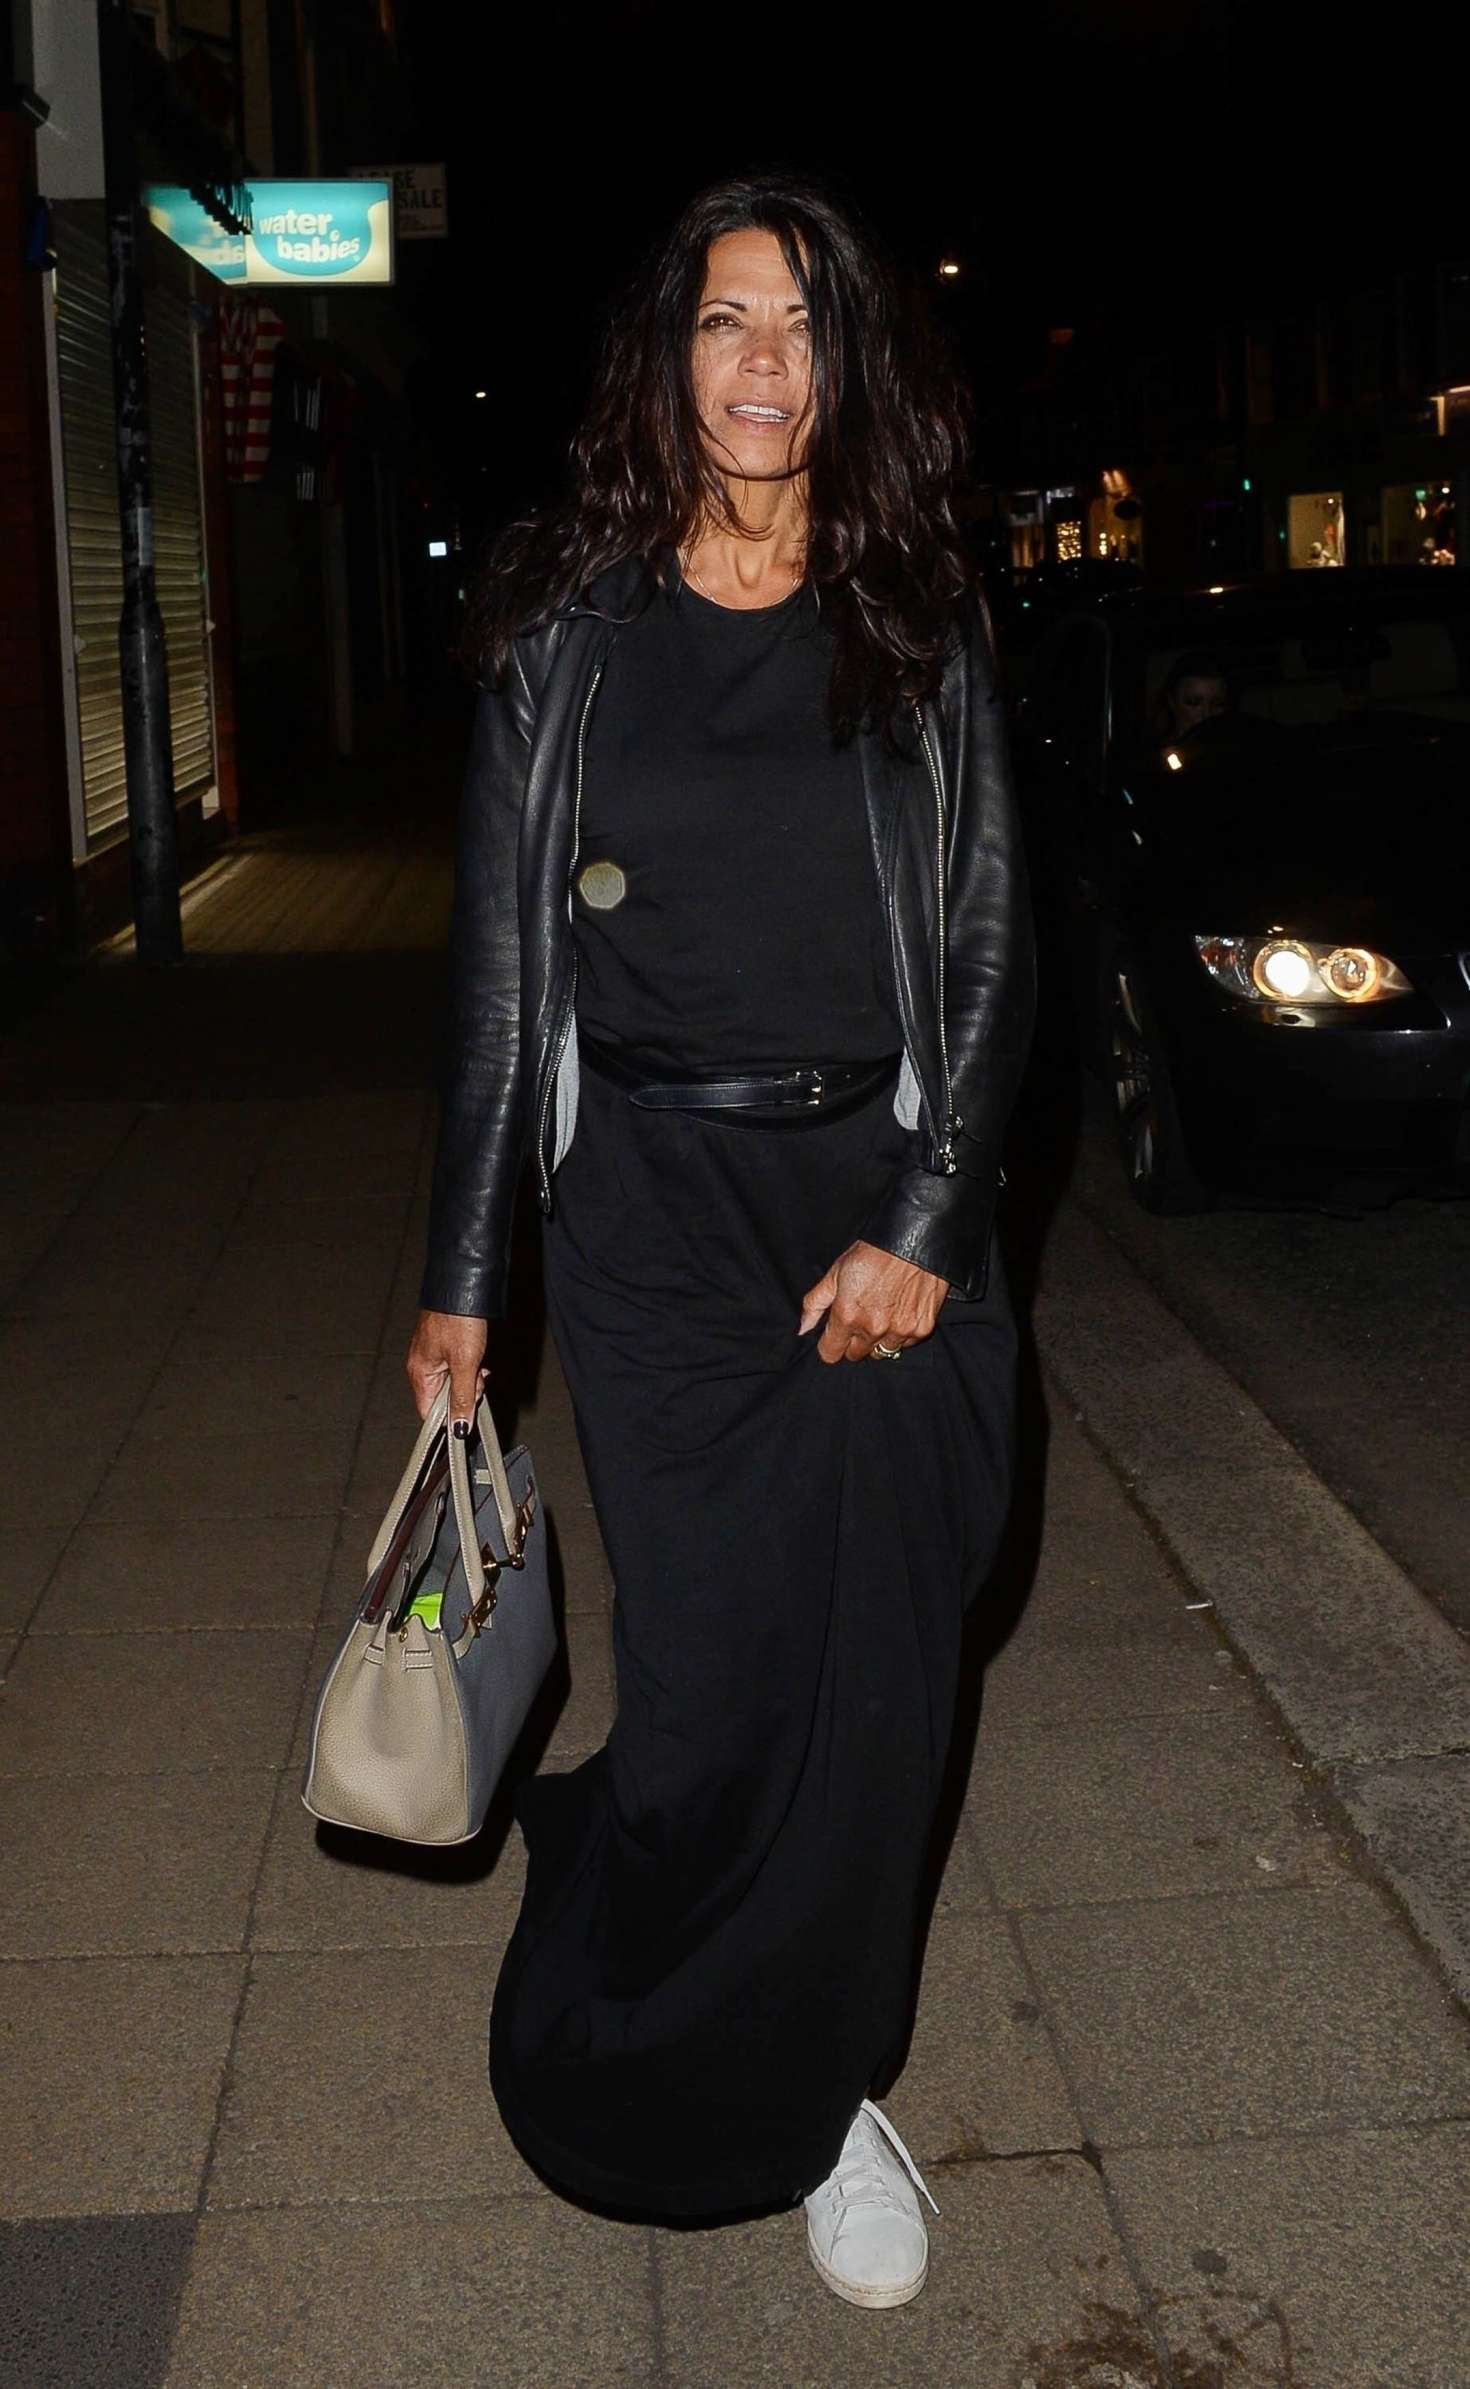 Jenny Powell in Long Black Dress out in Cheshire